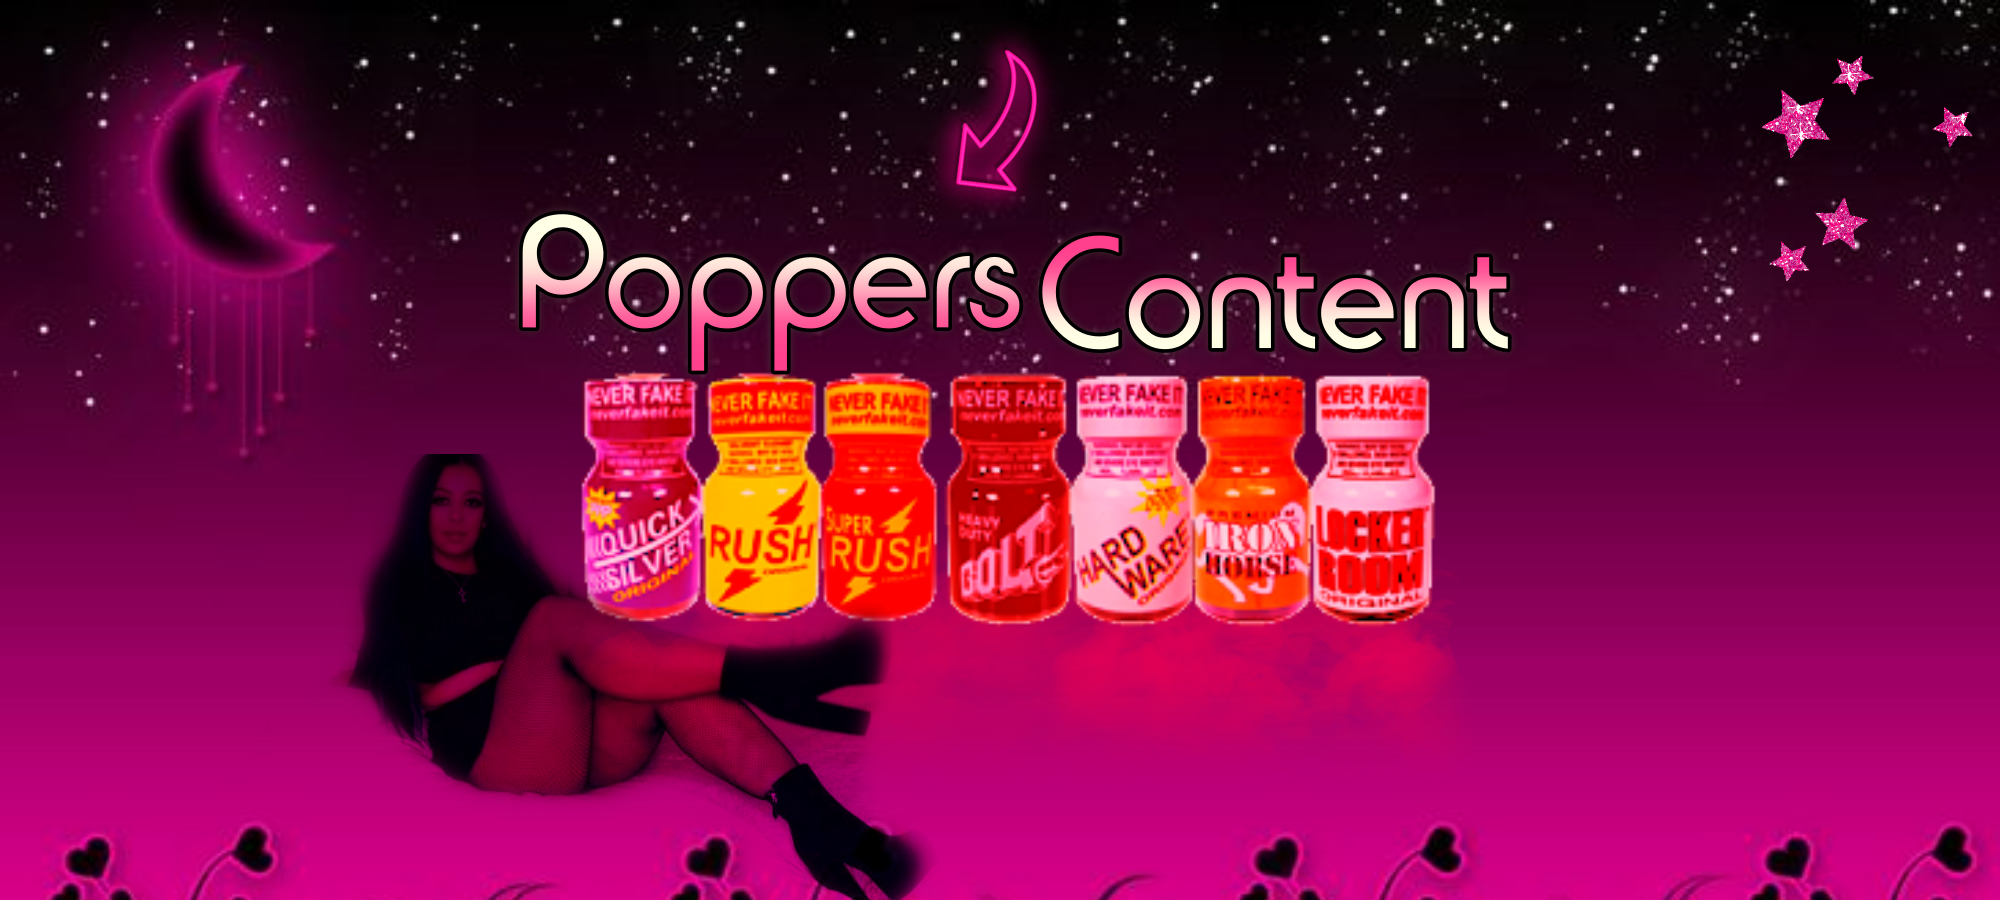 poppers content instructions